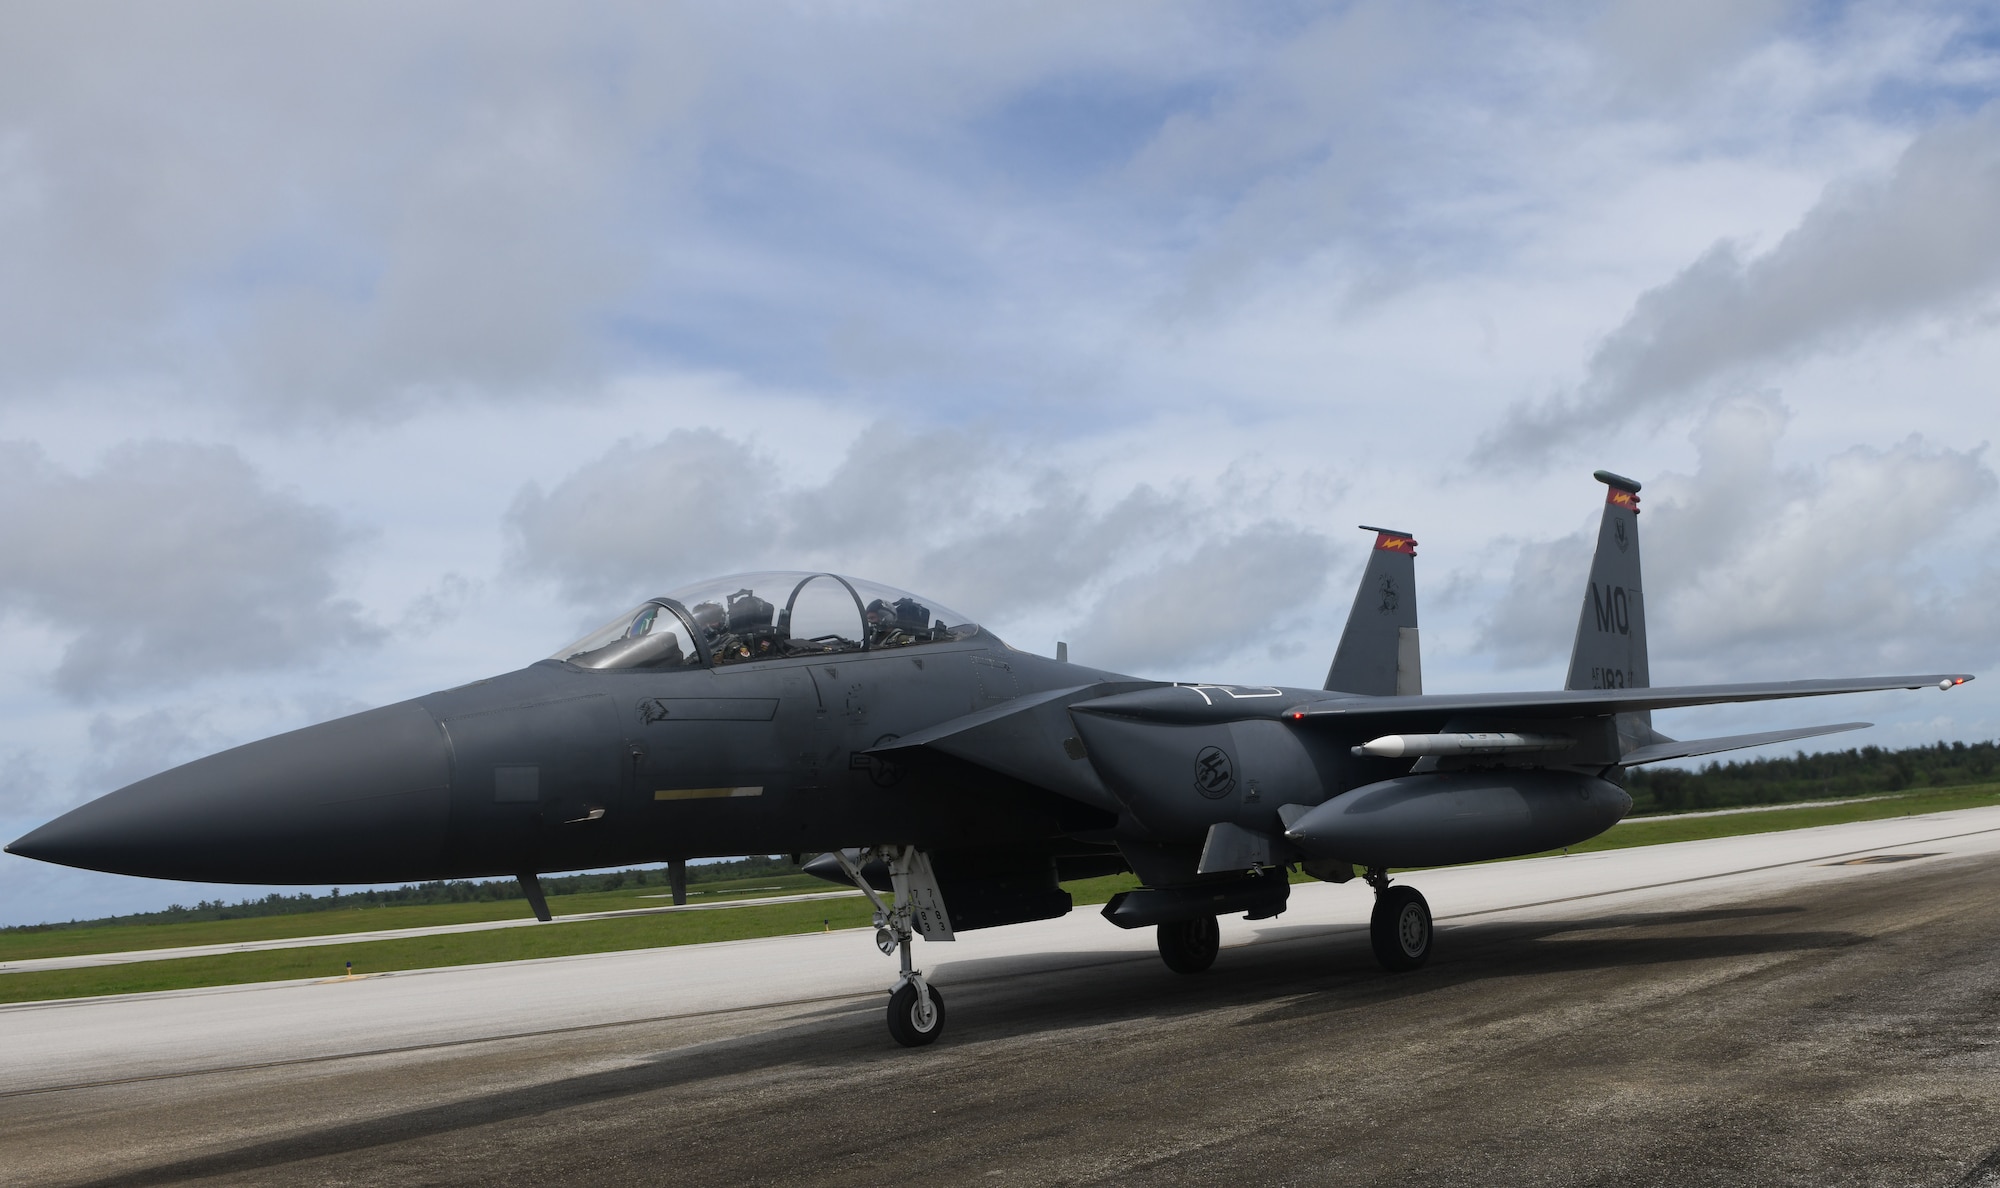 A U.S. Air Force F-15E Strike Eagle from Mountain Home Air Force Base, Idaho, taxis along the flightline at the Tinian International Airport, Tinian, July 27, 2021. Members from the 366th Fighter Wing arrived on Tinian for a historic first-time in order to support Pacific Iron 2021. Approximately 800 Airmen and 35 aircraft are participating in Pacific Air Forces’ dynamic force employment operation July 11 to Aug. 8, 2021, in Guam and Tinian to project forces into U.S. Indo-Pacific Command’s area of responsibility in support of the 2018 National Defense Strategy, calling on the military to be a more lethal, adaptive and resilient force. (U.S. Air Force photo by Tech. Sgt. Benjamin Sutton)